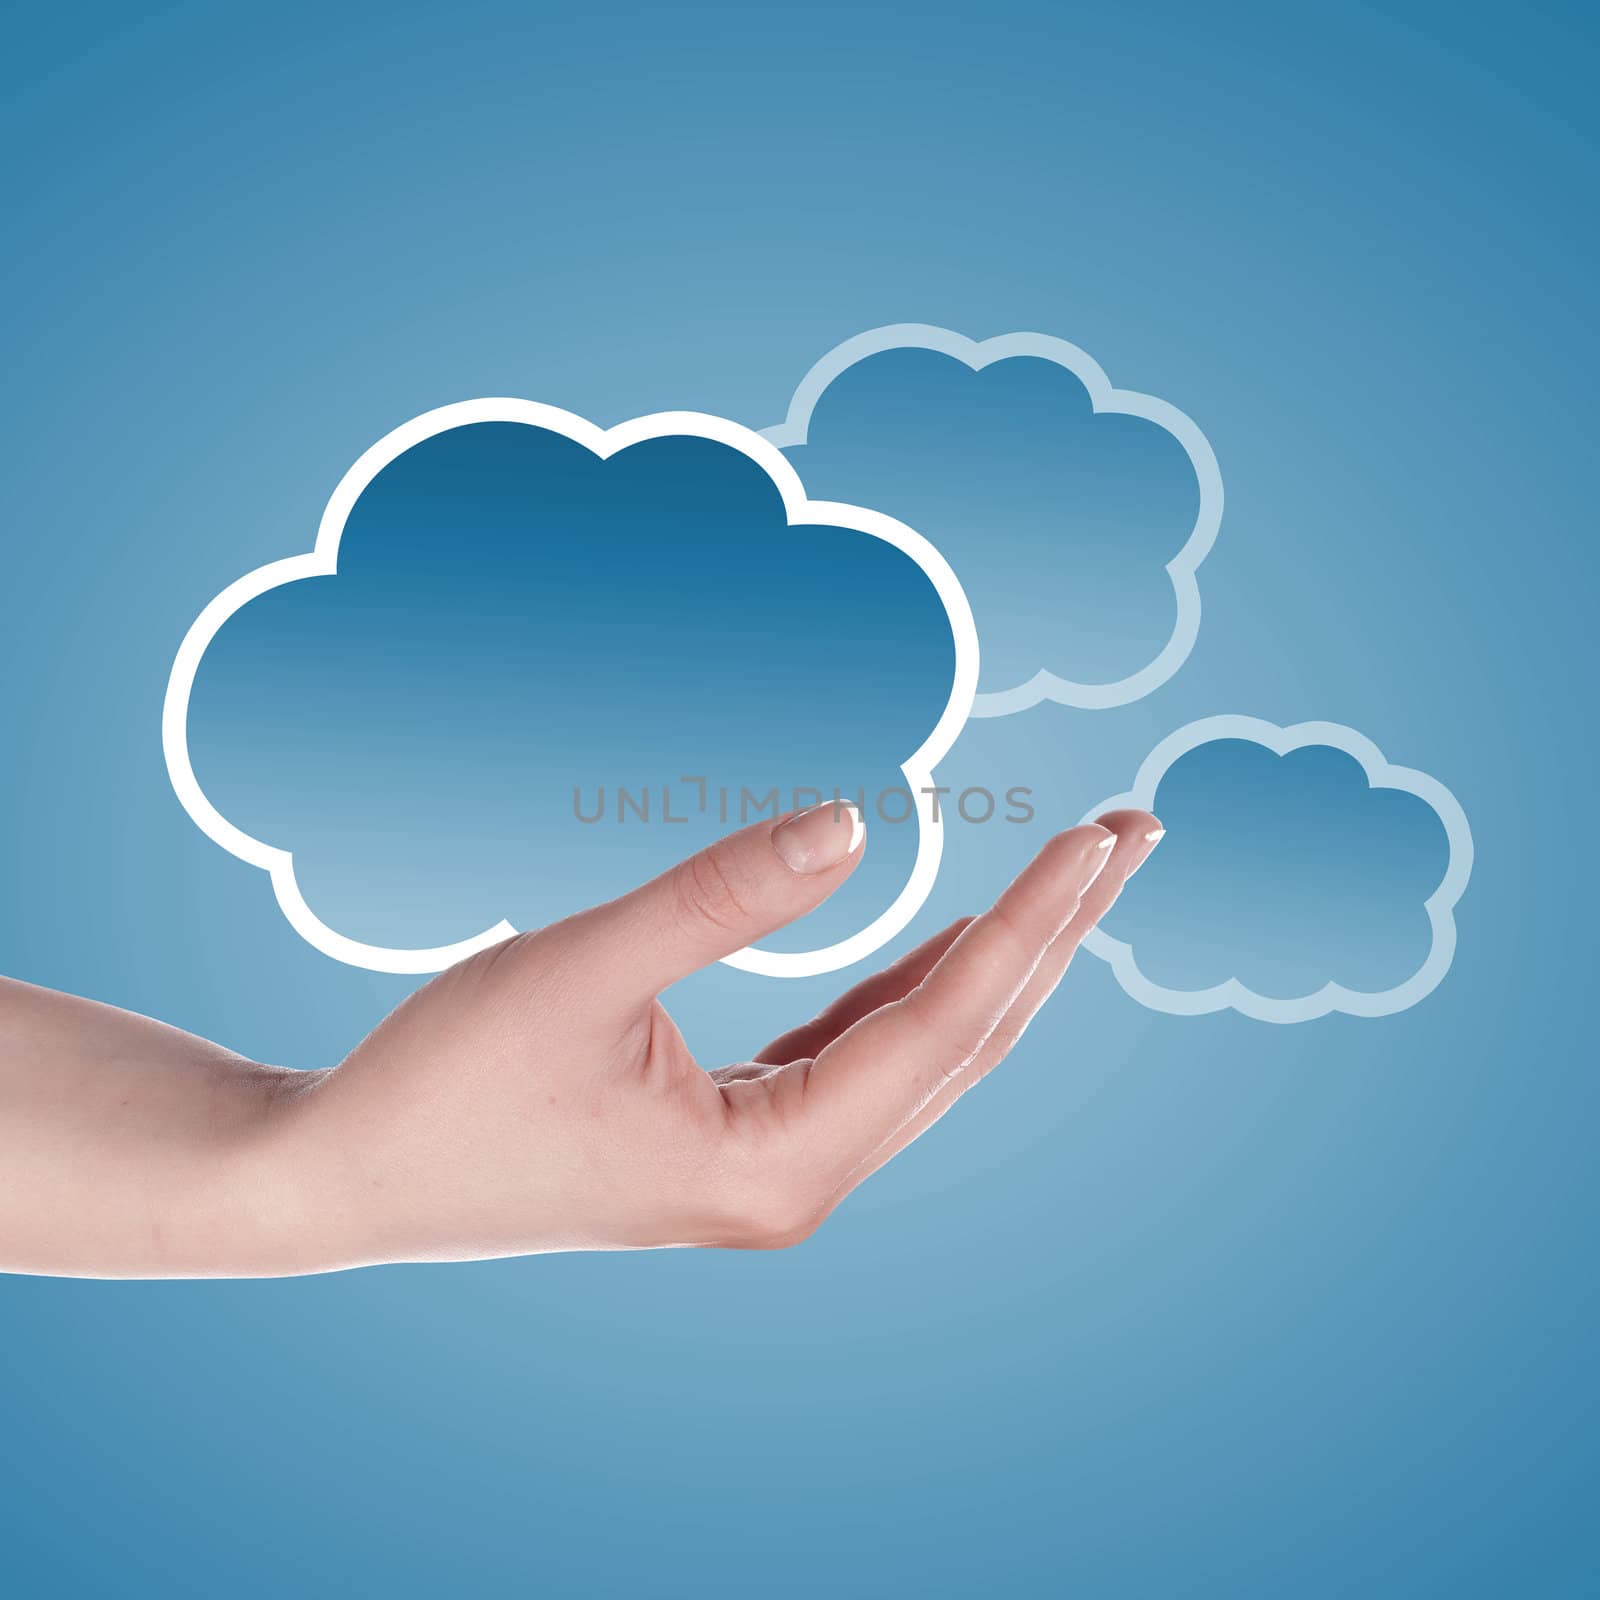 Hand with cloud computing symbol against colour background